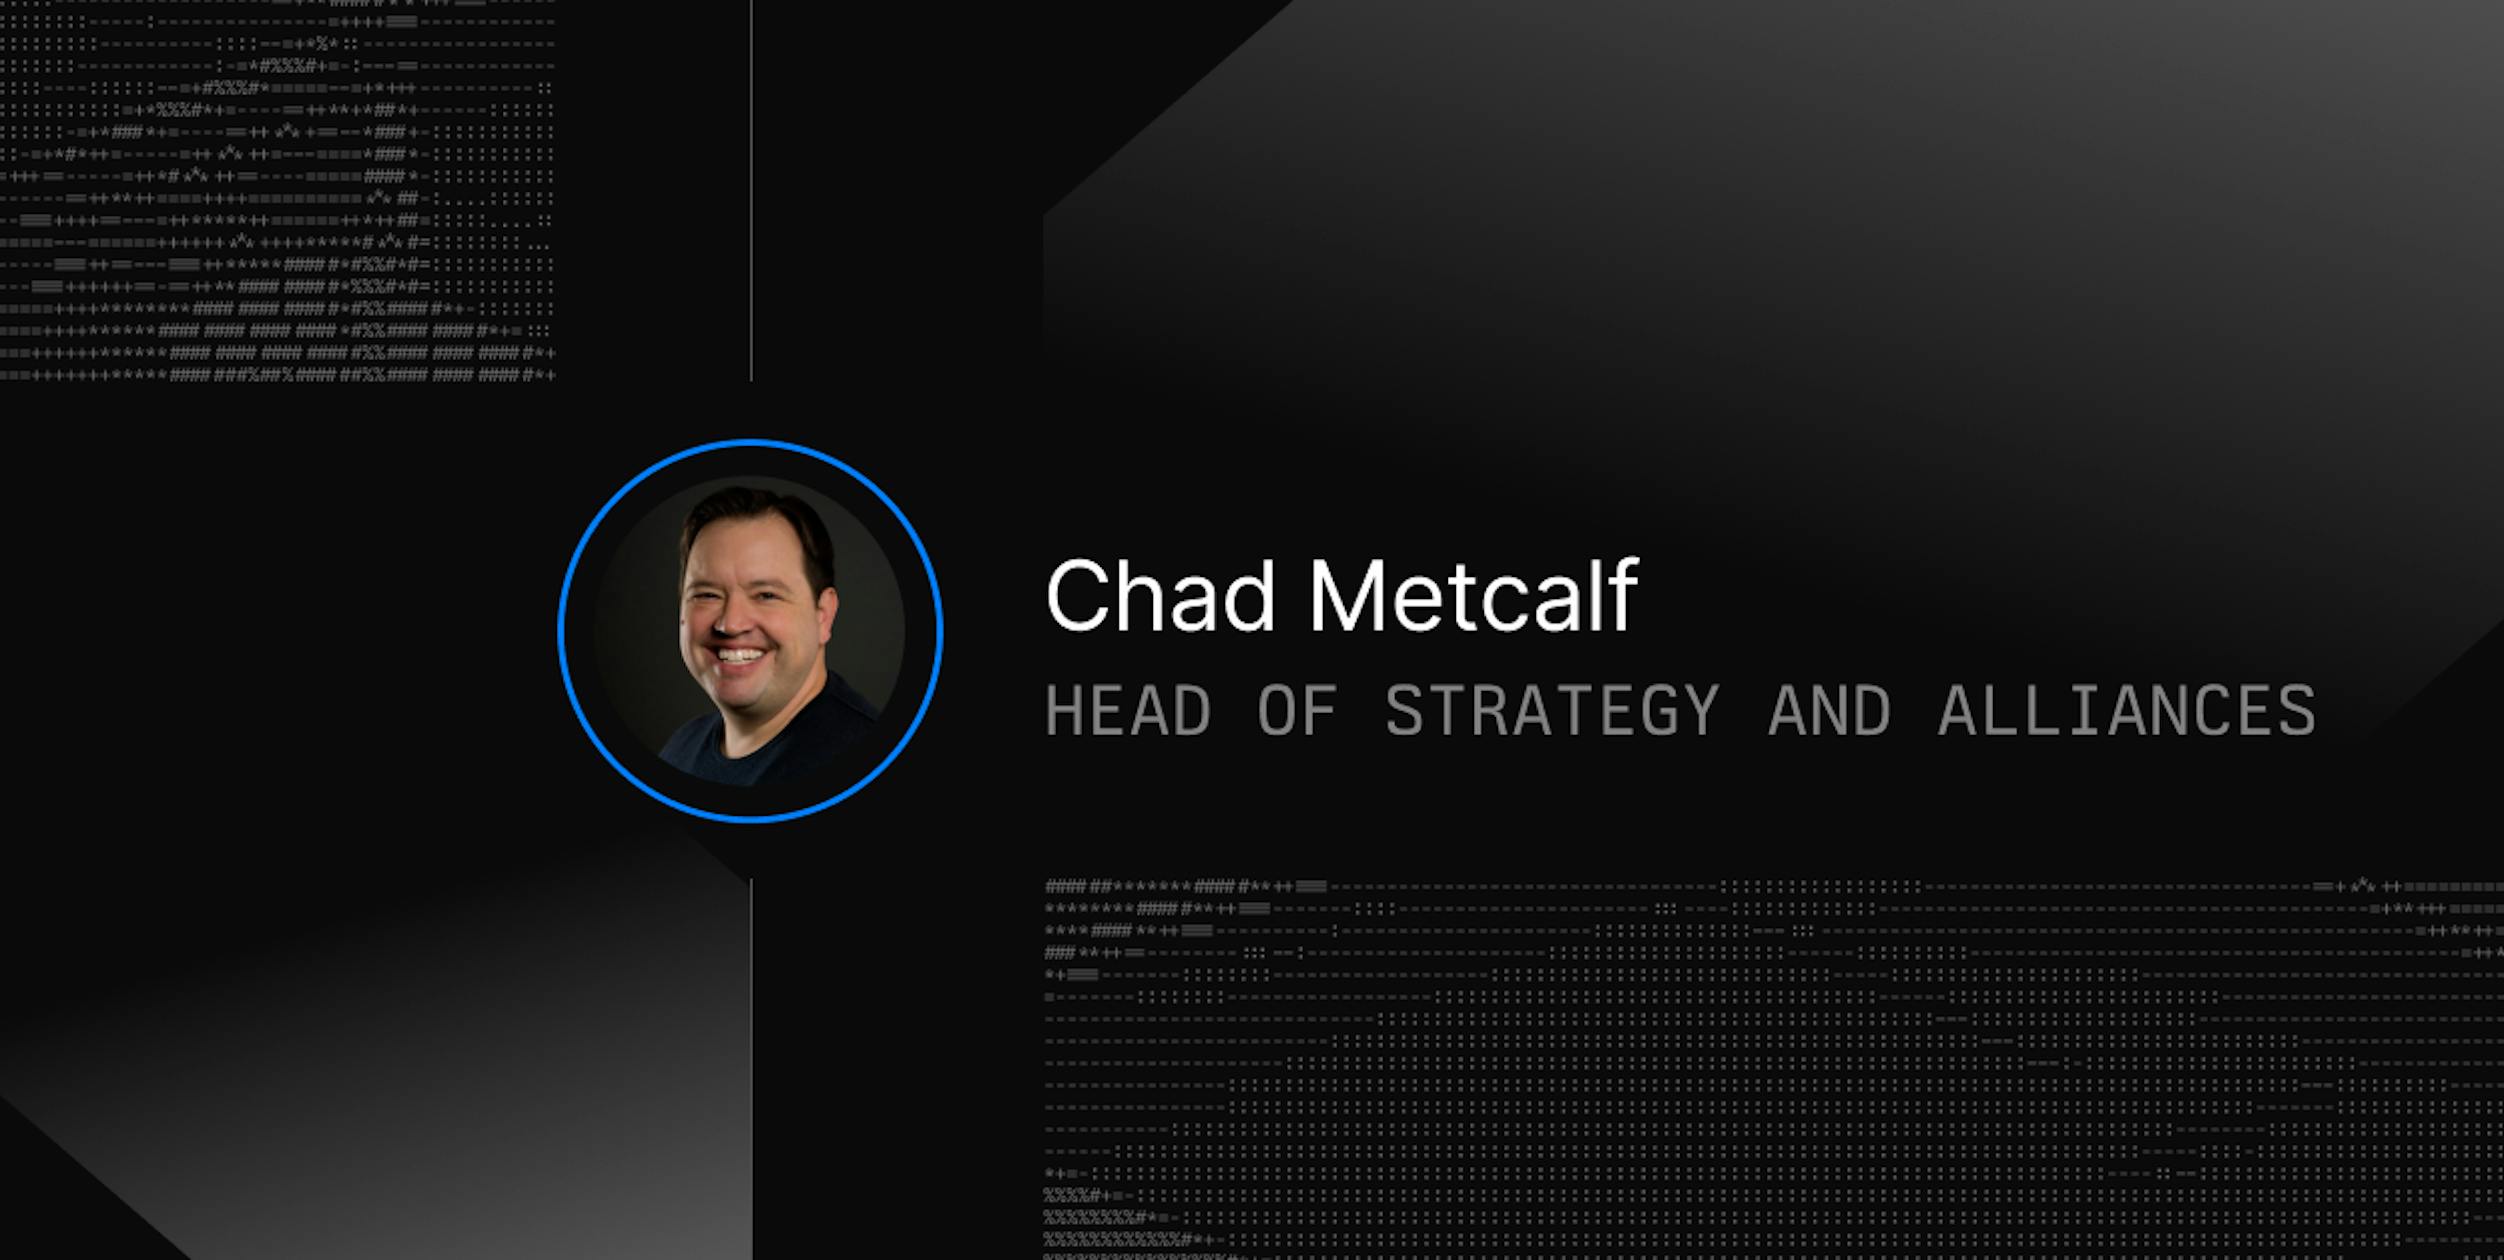 Chad Metcalf, Head of Strategy and Alliances at Daytona